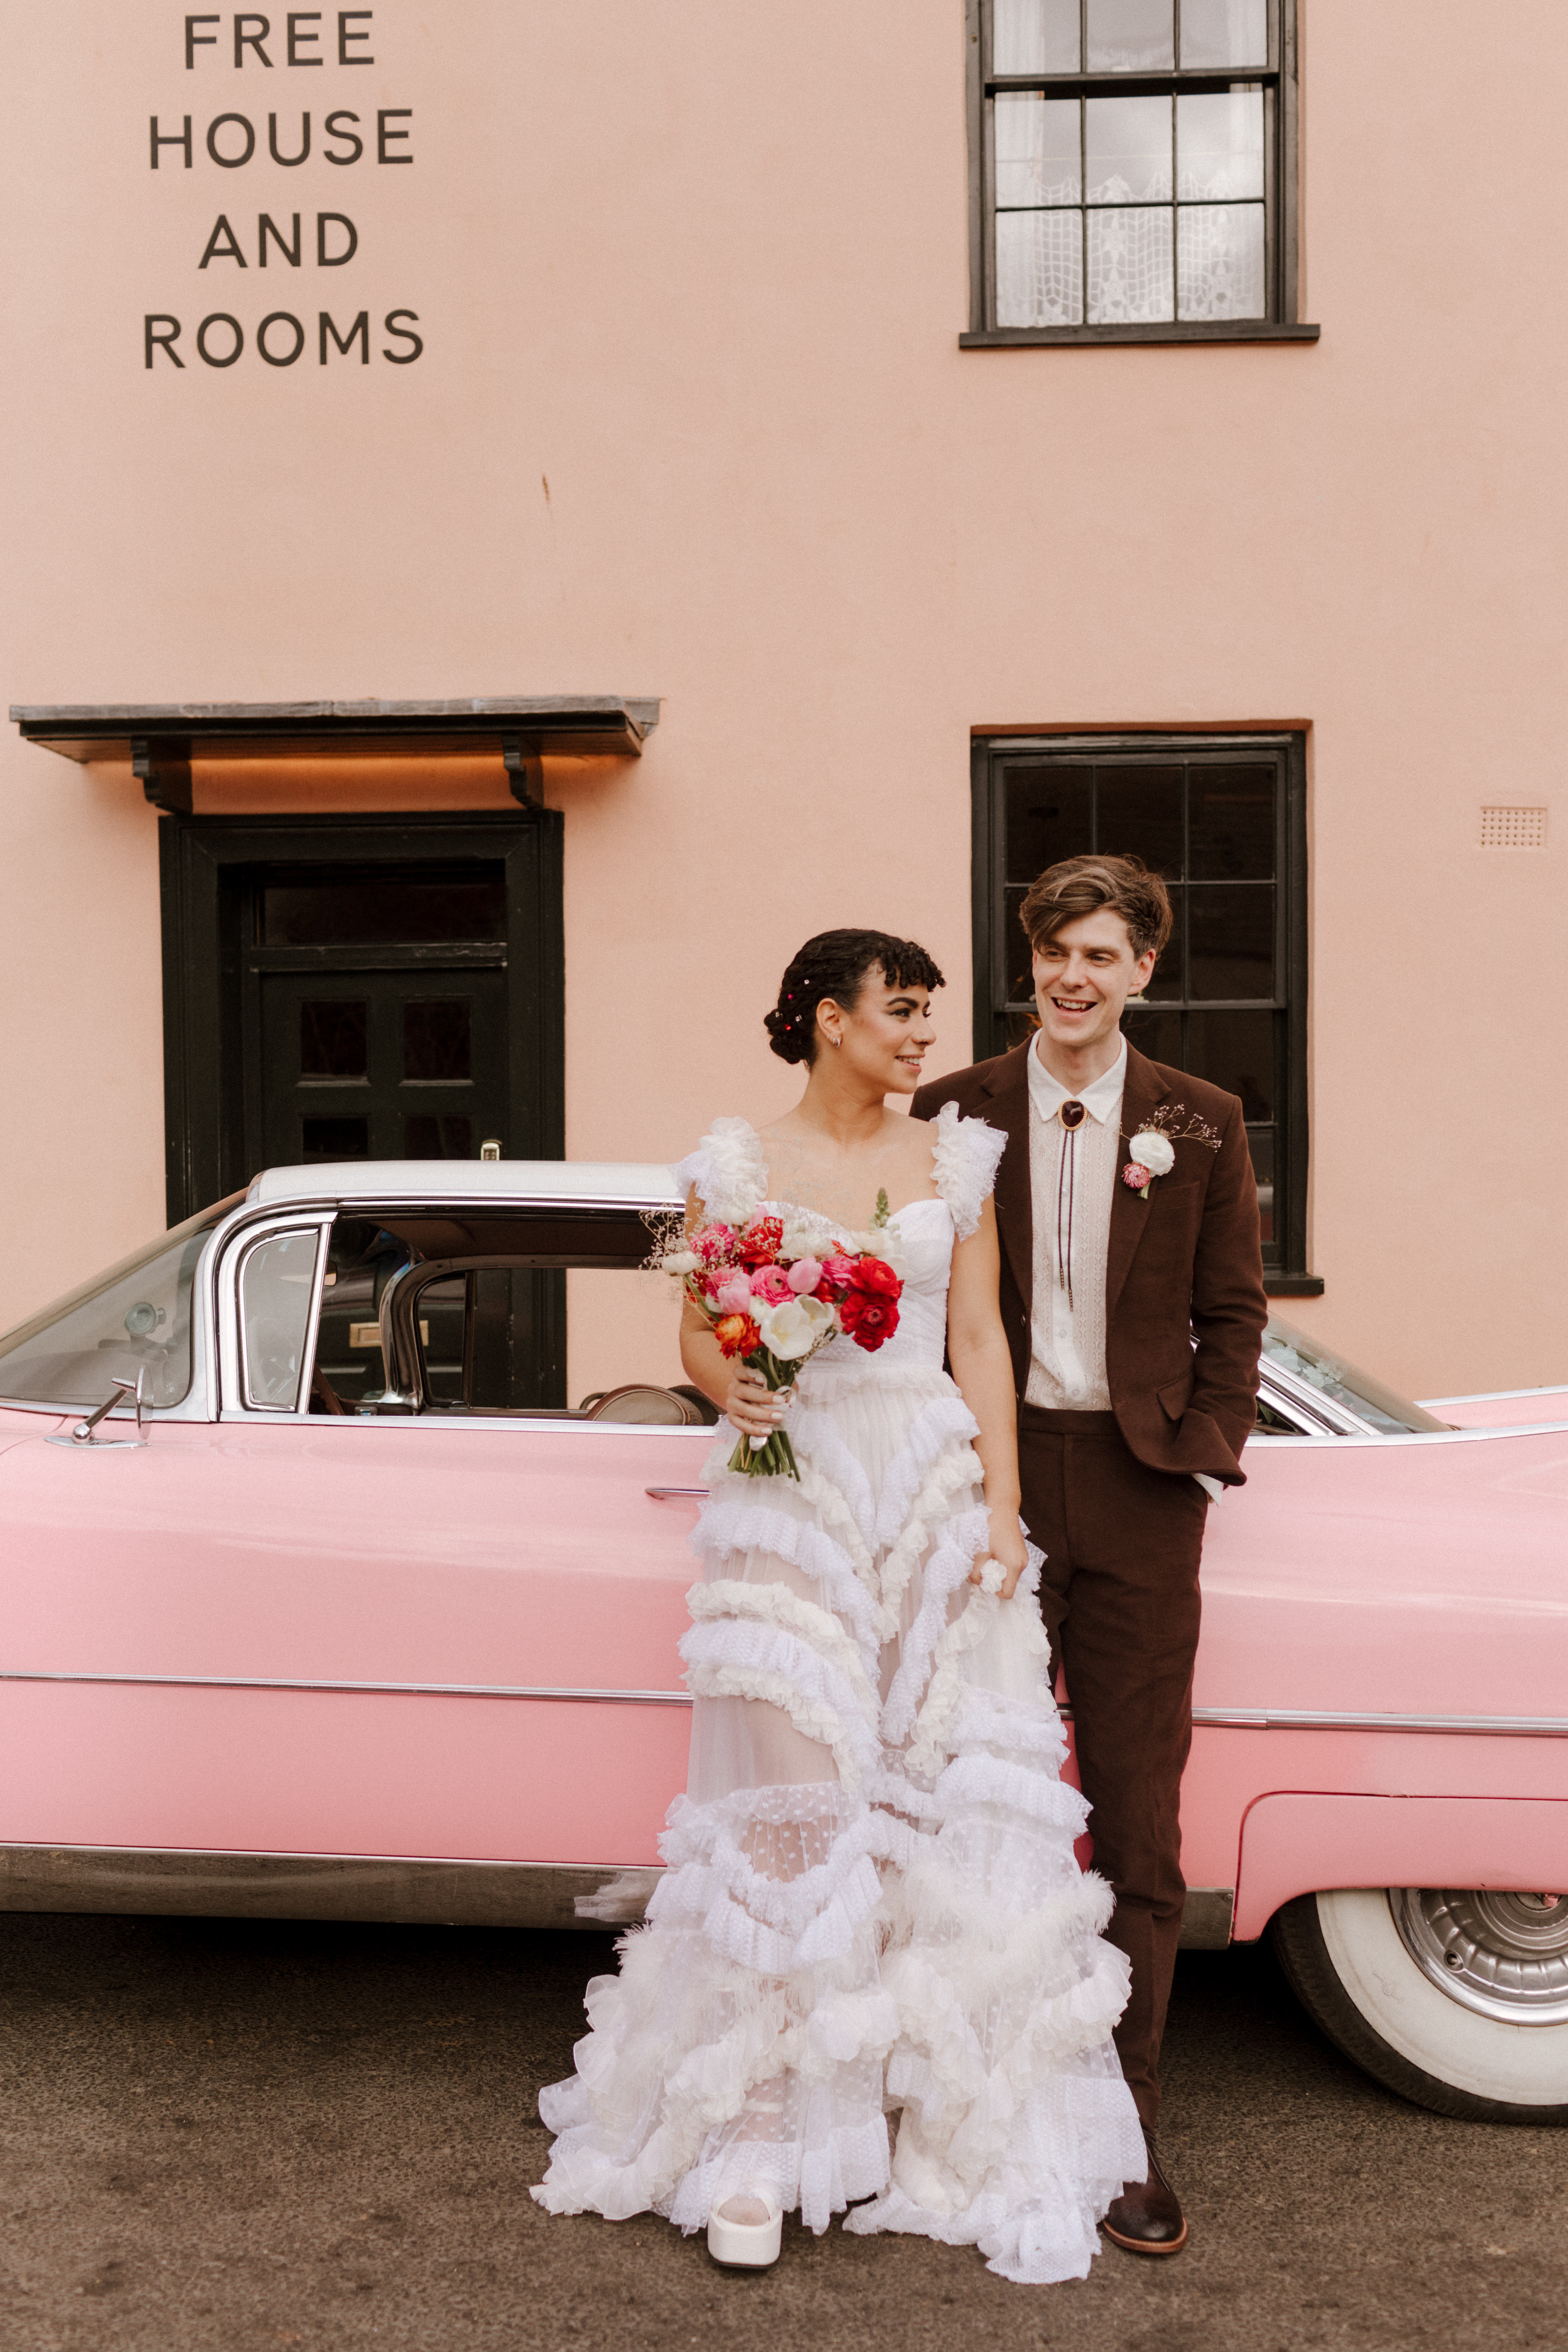 Second-hand wedding dresses: a bride wears a wedding dress from The Loop